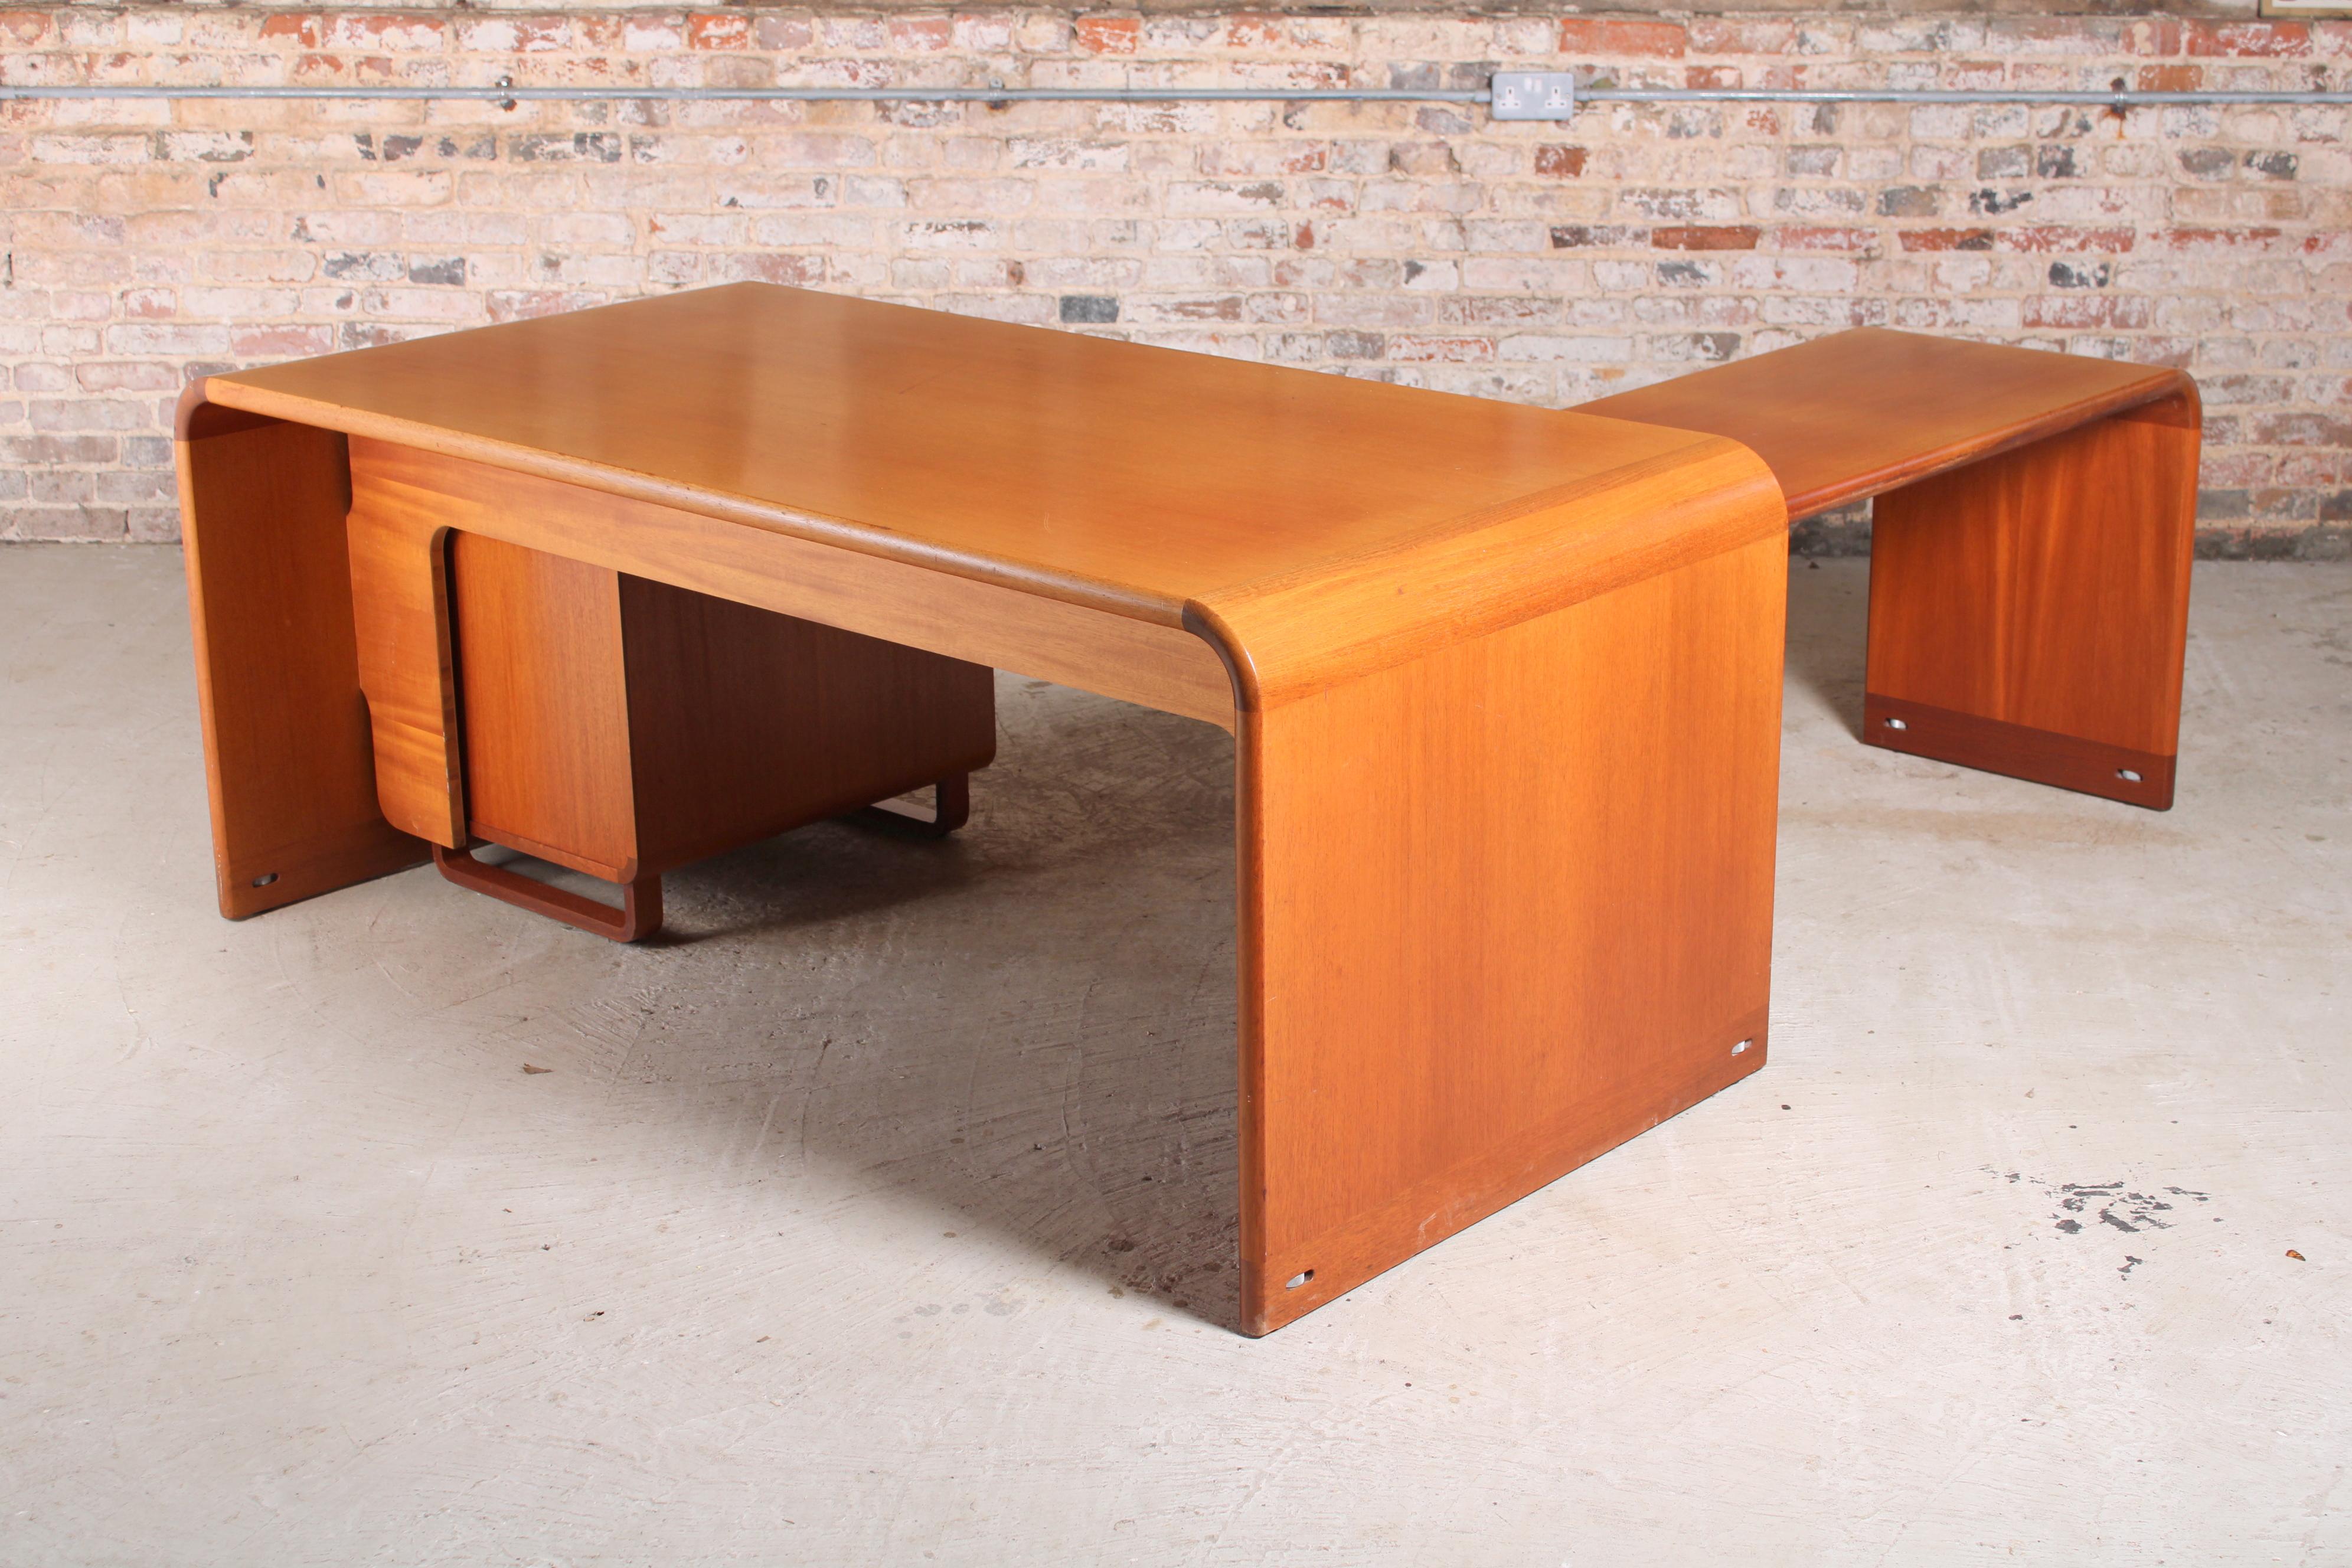 Danish mid century executive teak corner desk by Rud Thygesen & Johnny Sorensen, circa 1970s. Standalone chest of 5 drawers. The return section can be fixed in multiple positions, so the depth can vary from 150-207cm. Height adjustable feet.